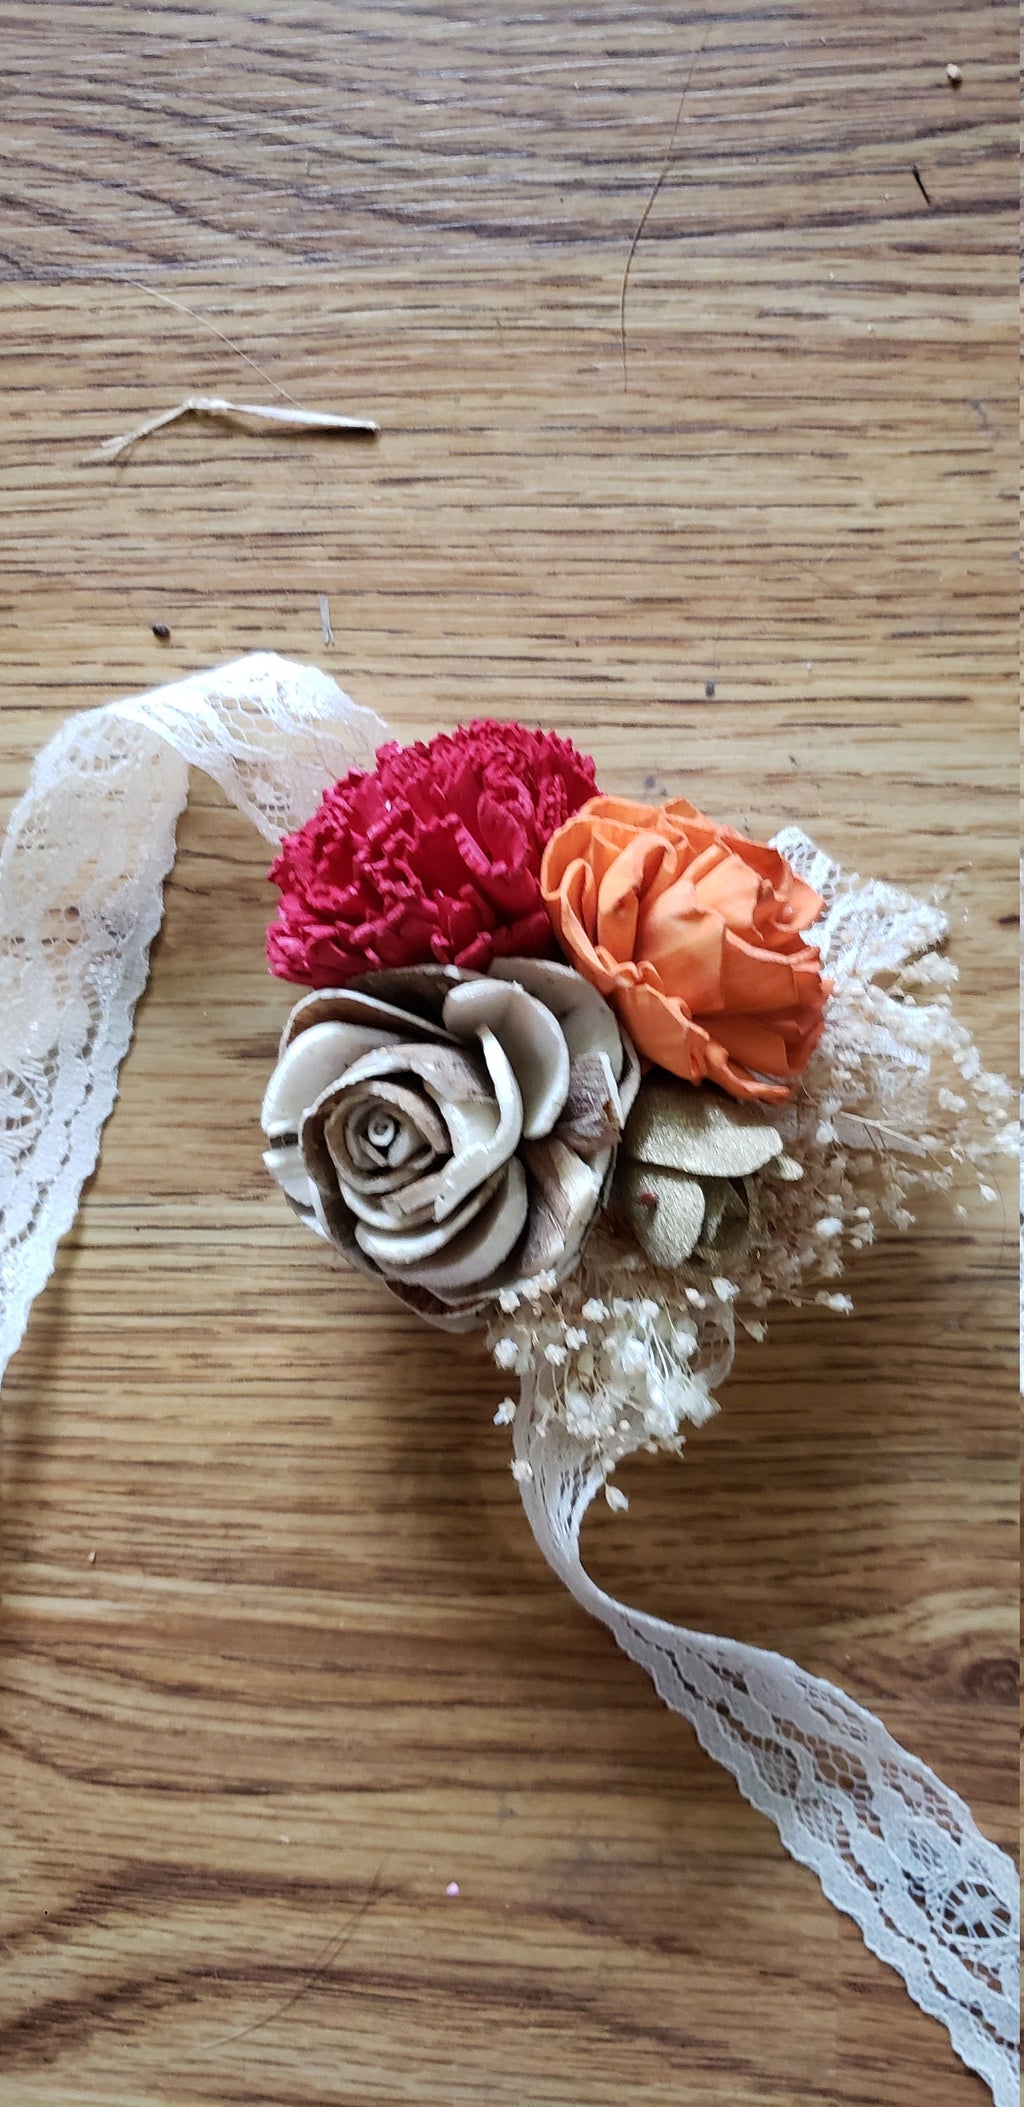 Fall Colors Wooden Wrist Corsage